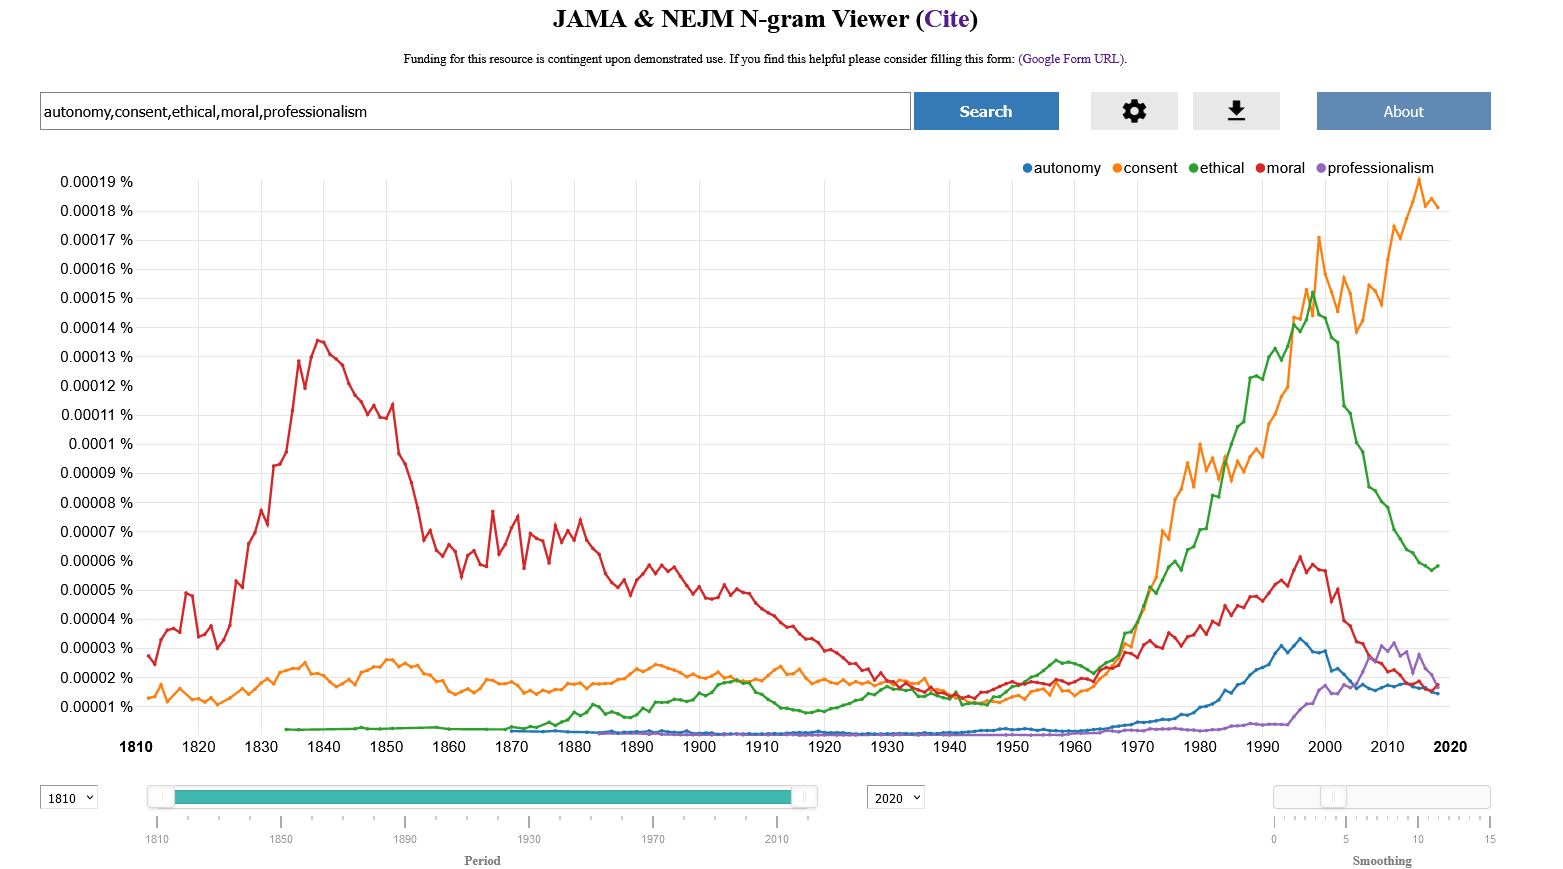 Screen shot of the Looking Glass N-gram Viewer showing that usage of the word moral has decreased in articles from a high in the 1830s. As of today, the following terms are used in order of decreasing popularity: consent (most commonly used), ethical, moral, professionalism, and autonomy (least common).